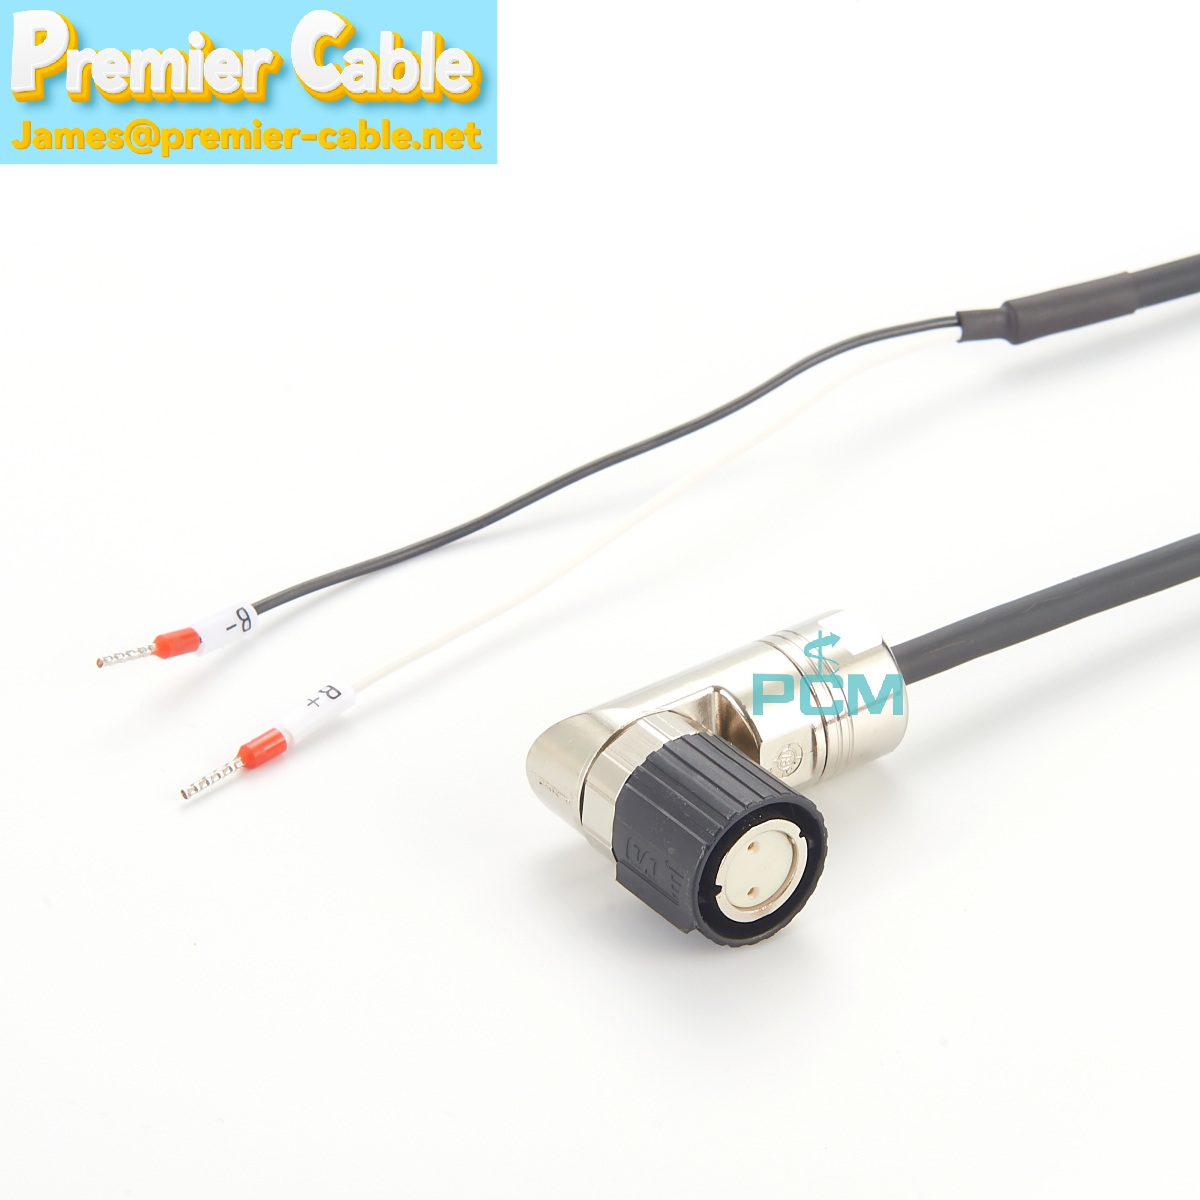 Brake cable pre-assembled 6FX3002-5BL02 2x0.75 for motor S-1FL6